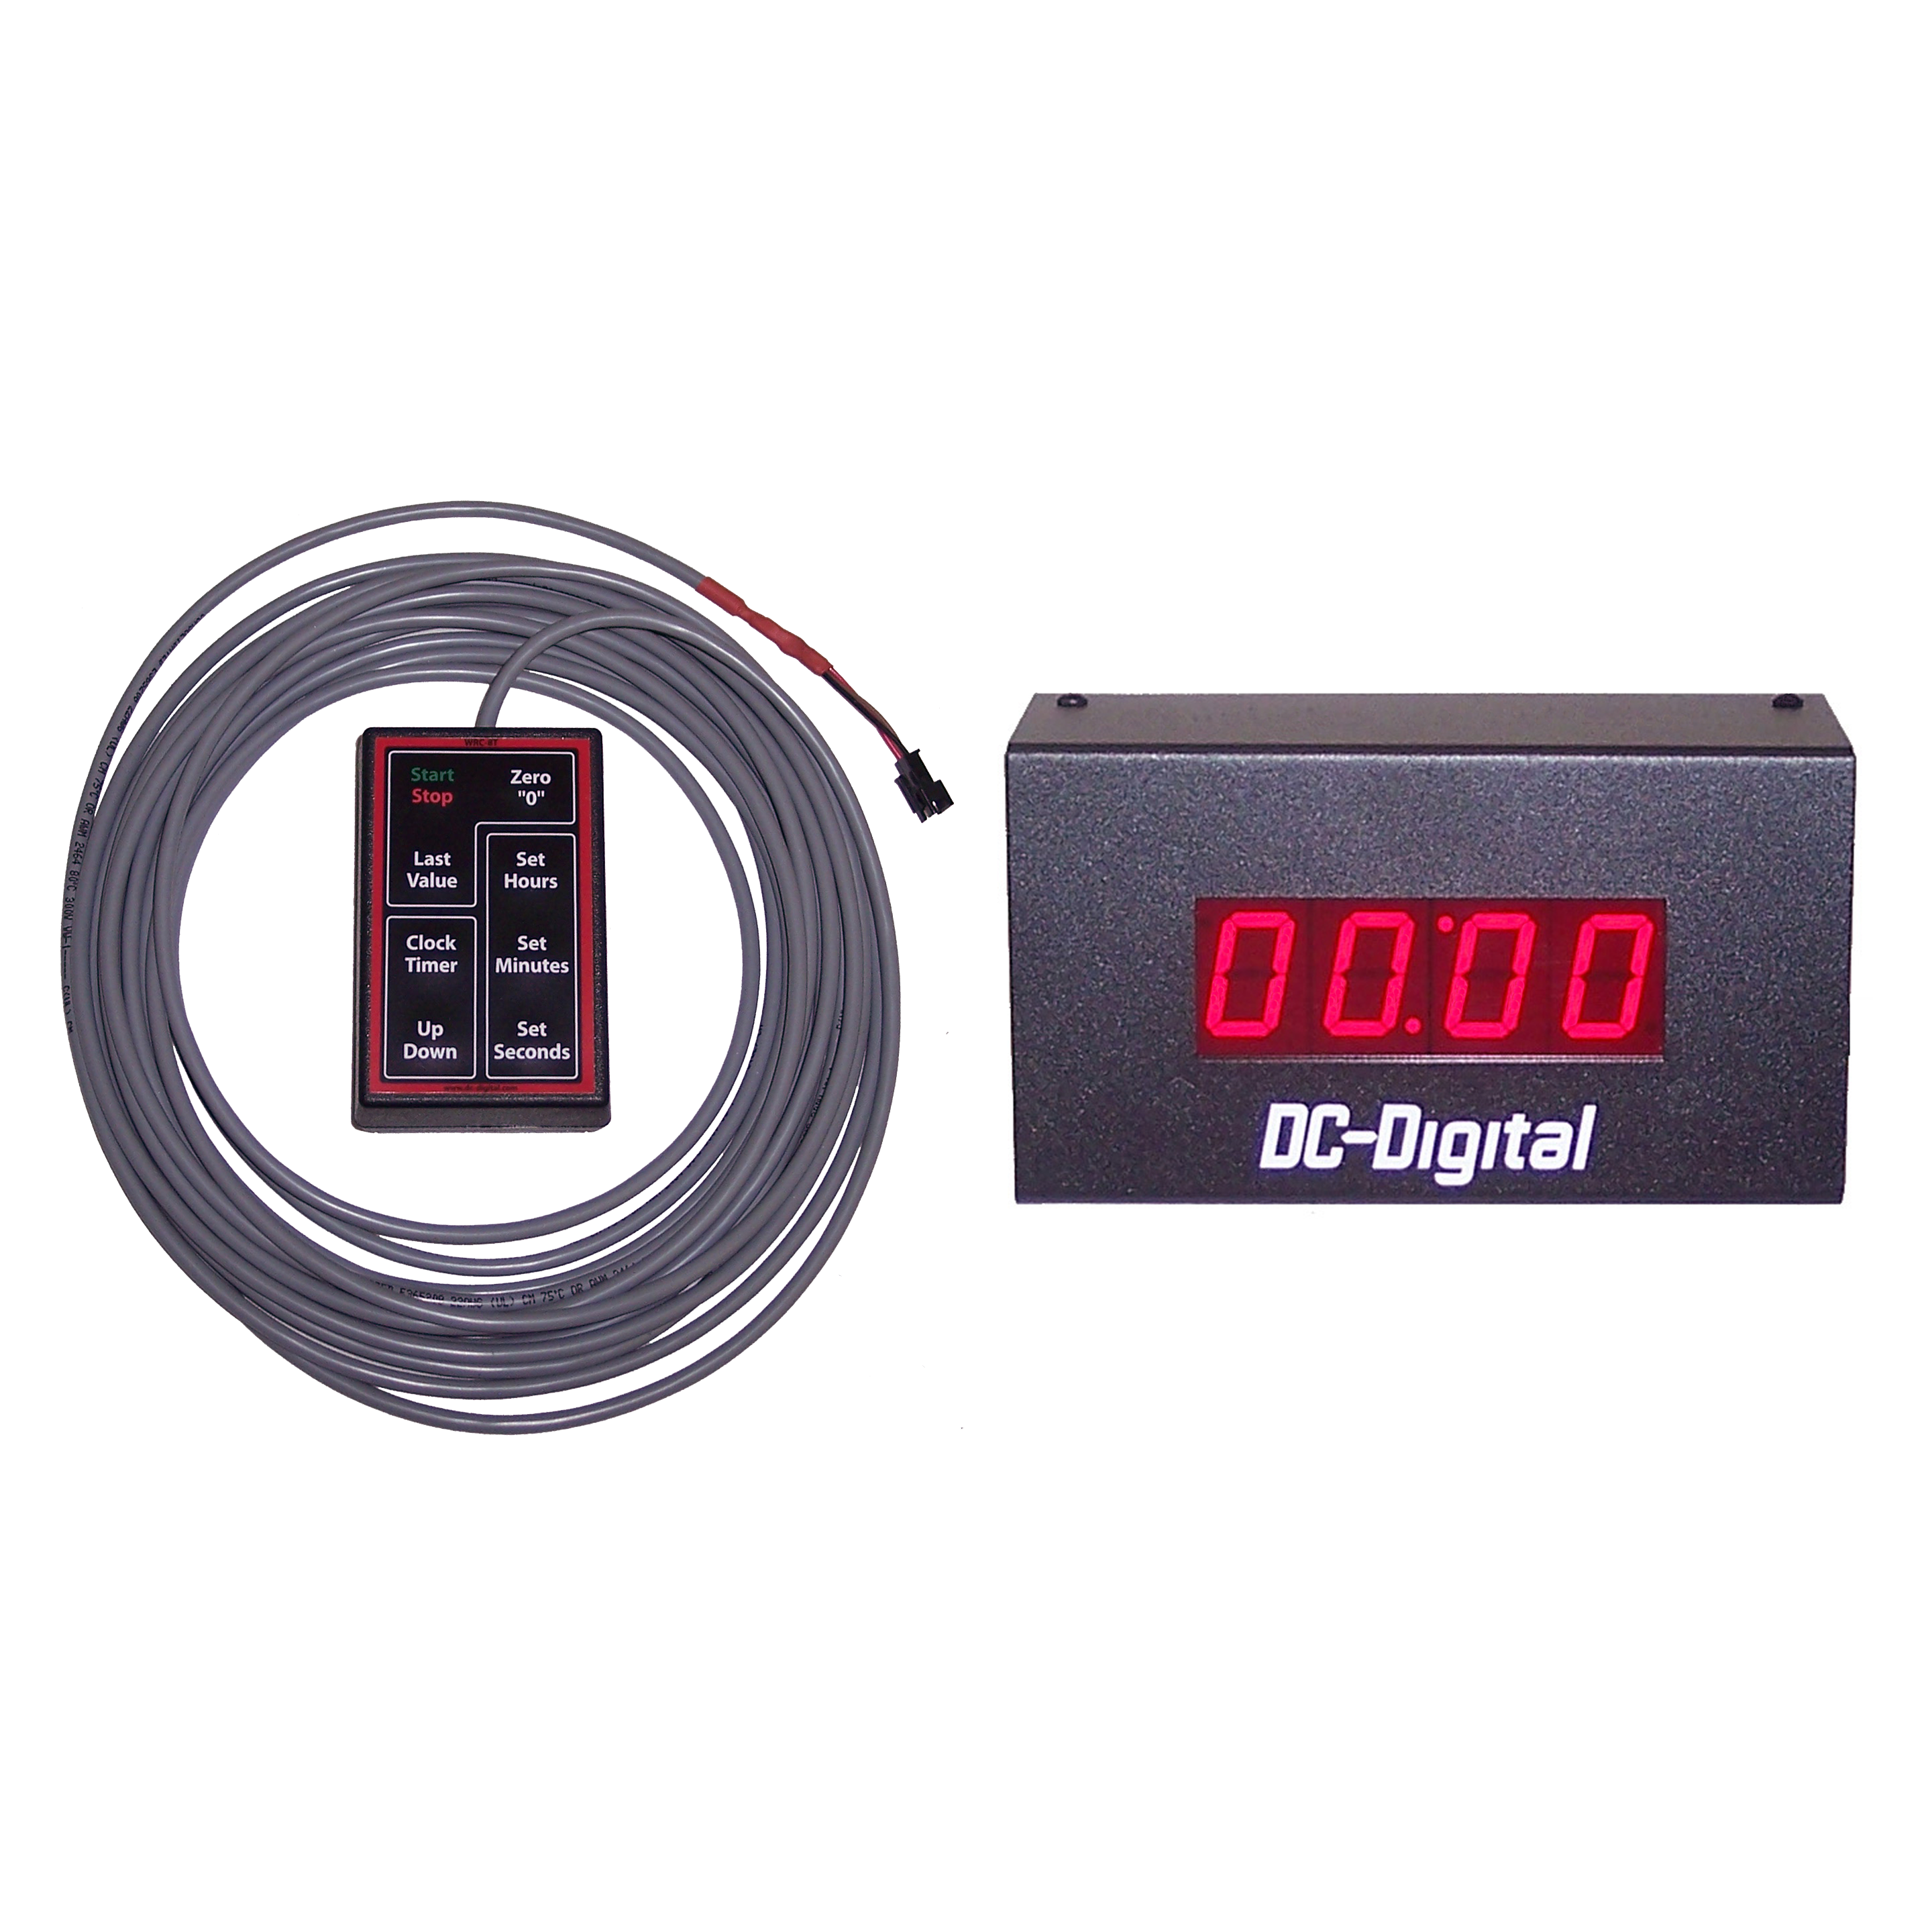 (DC-10UT-WR) 1.0 Inch LED Digital, Multifunction, Wired Handheld Controlled, Count Up timer, Countdown Timer, Time of Day Clock